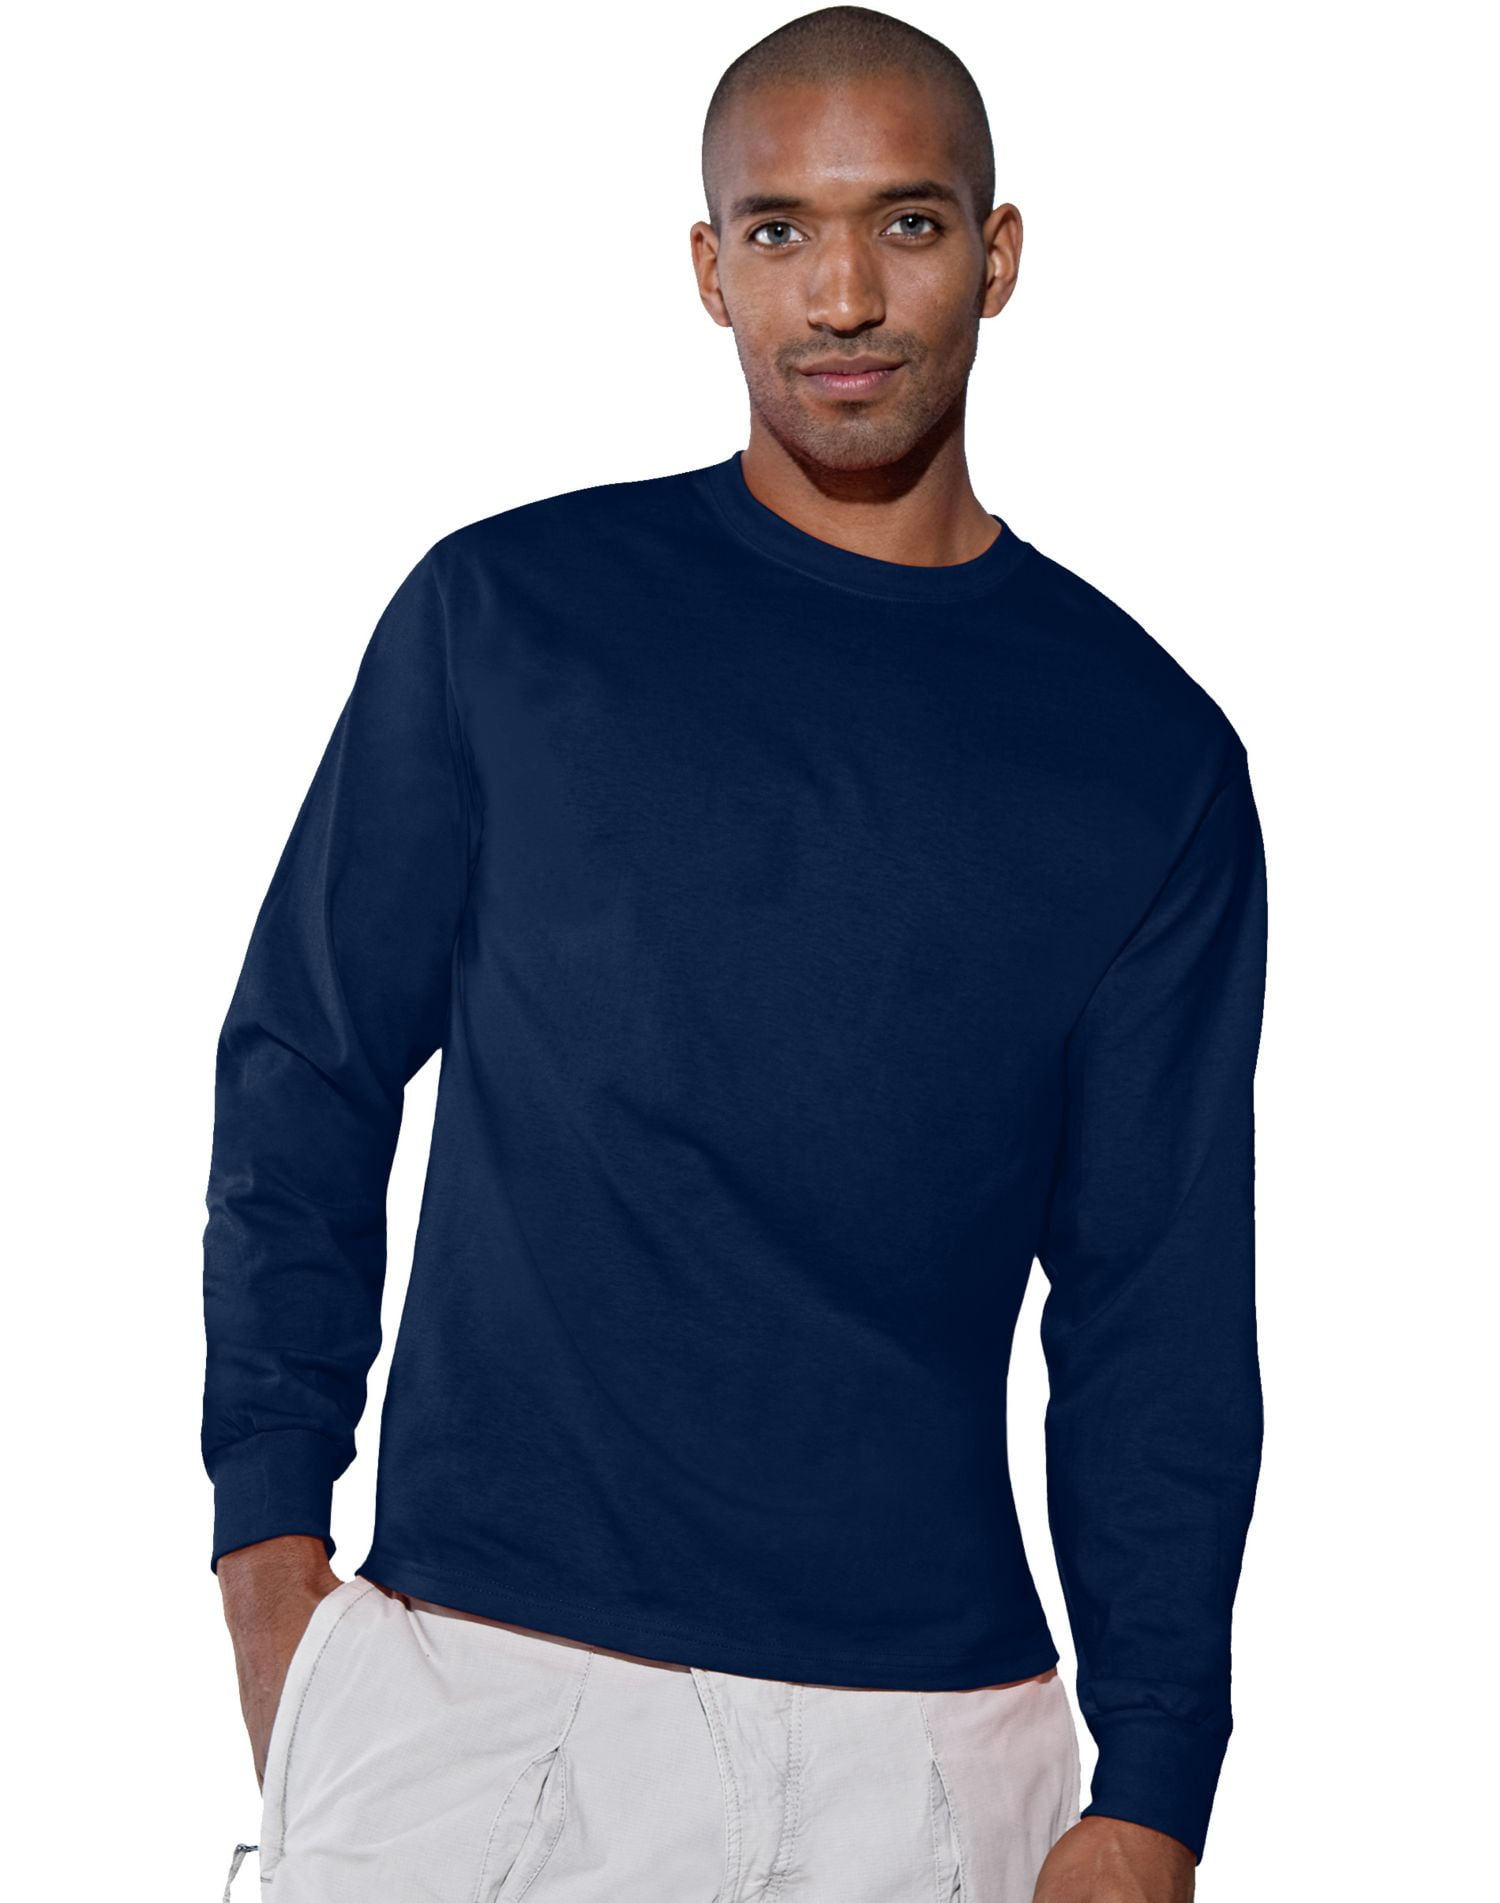 Hanes Men's and Big Men's Authentic Long Sleeve Tee, up to Size